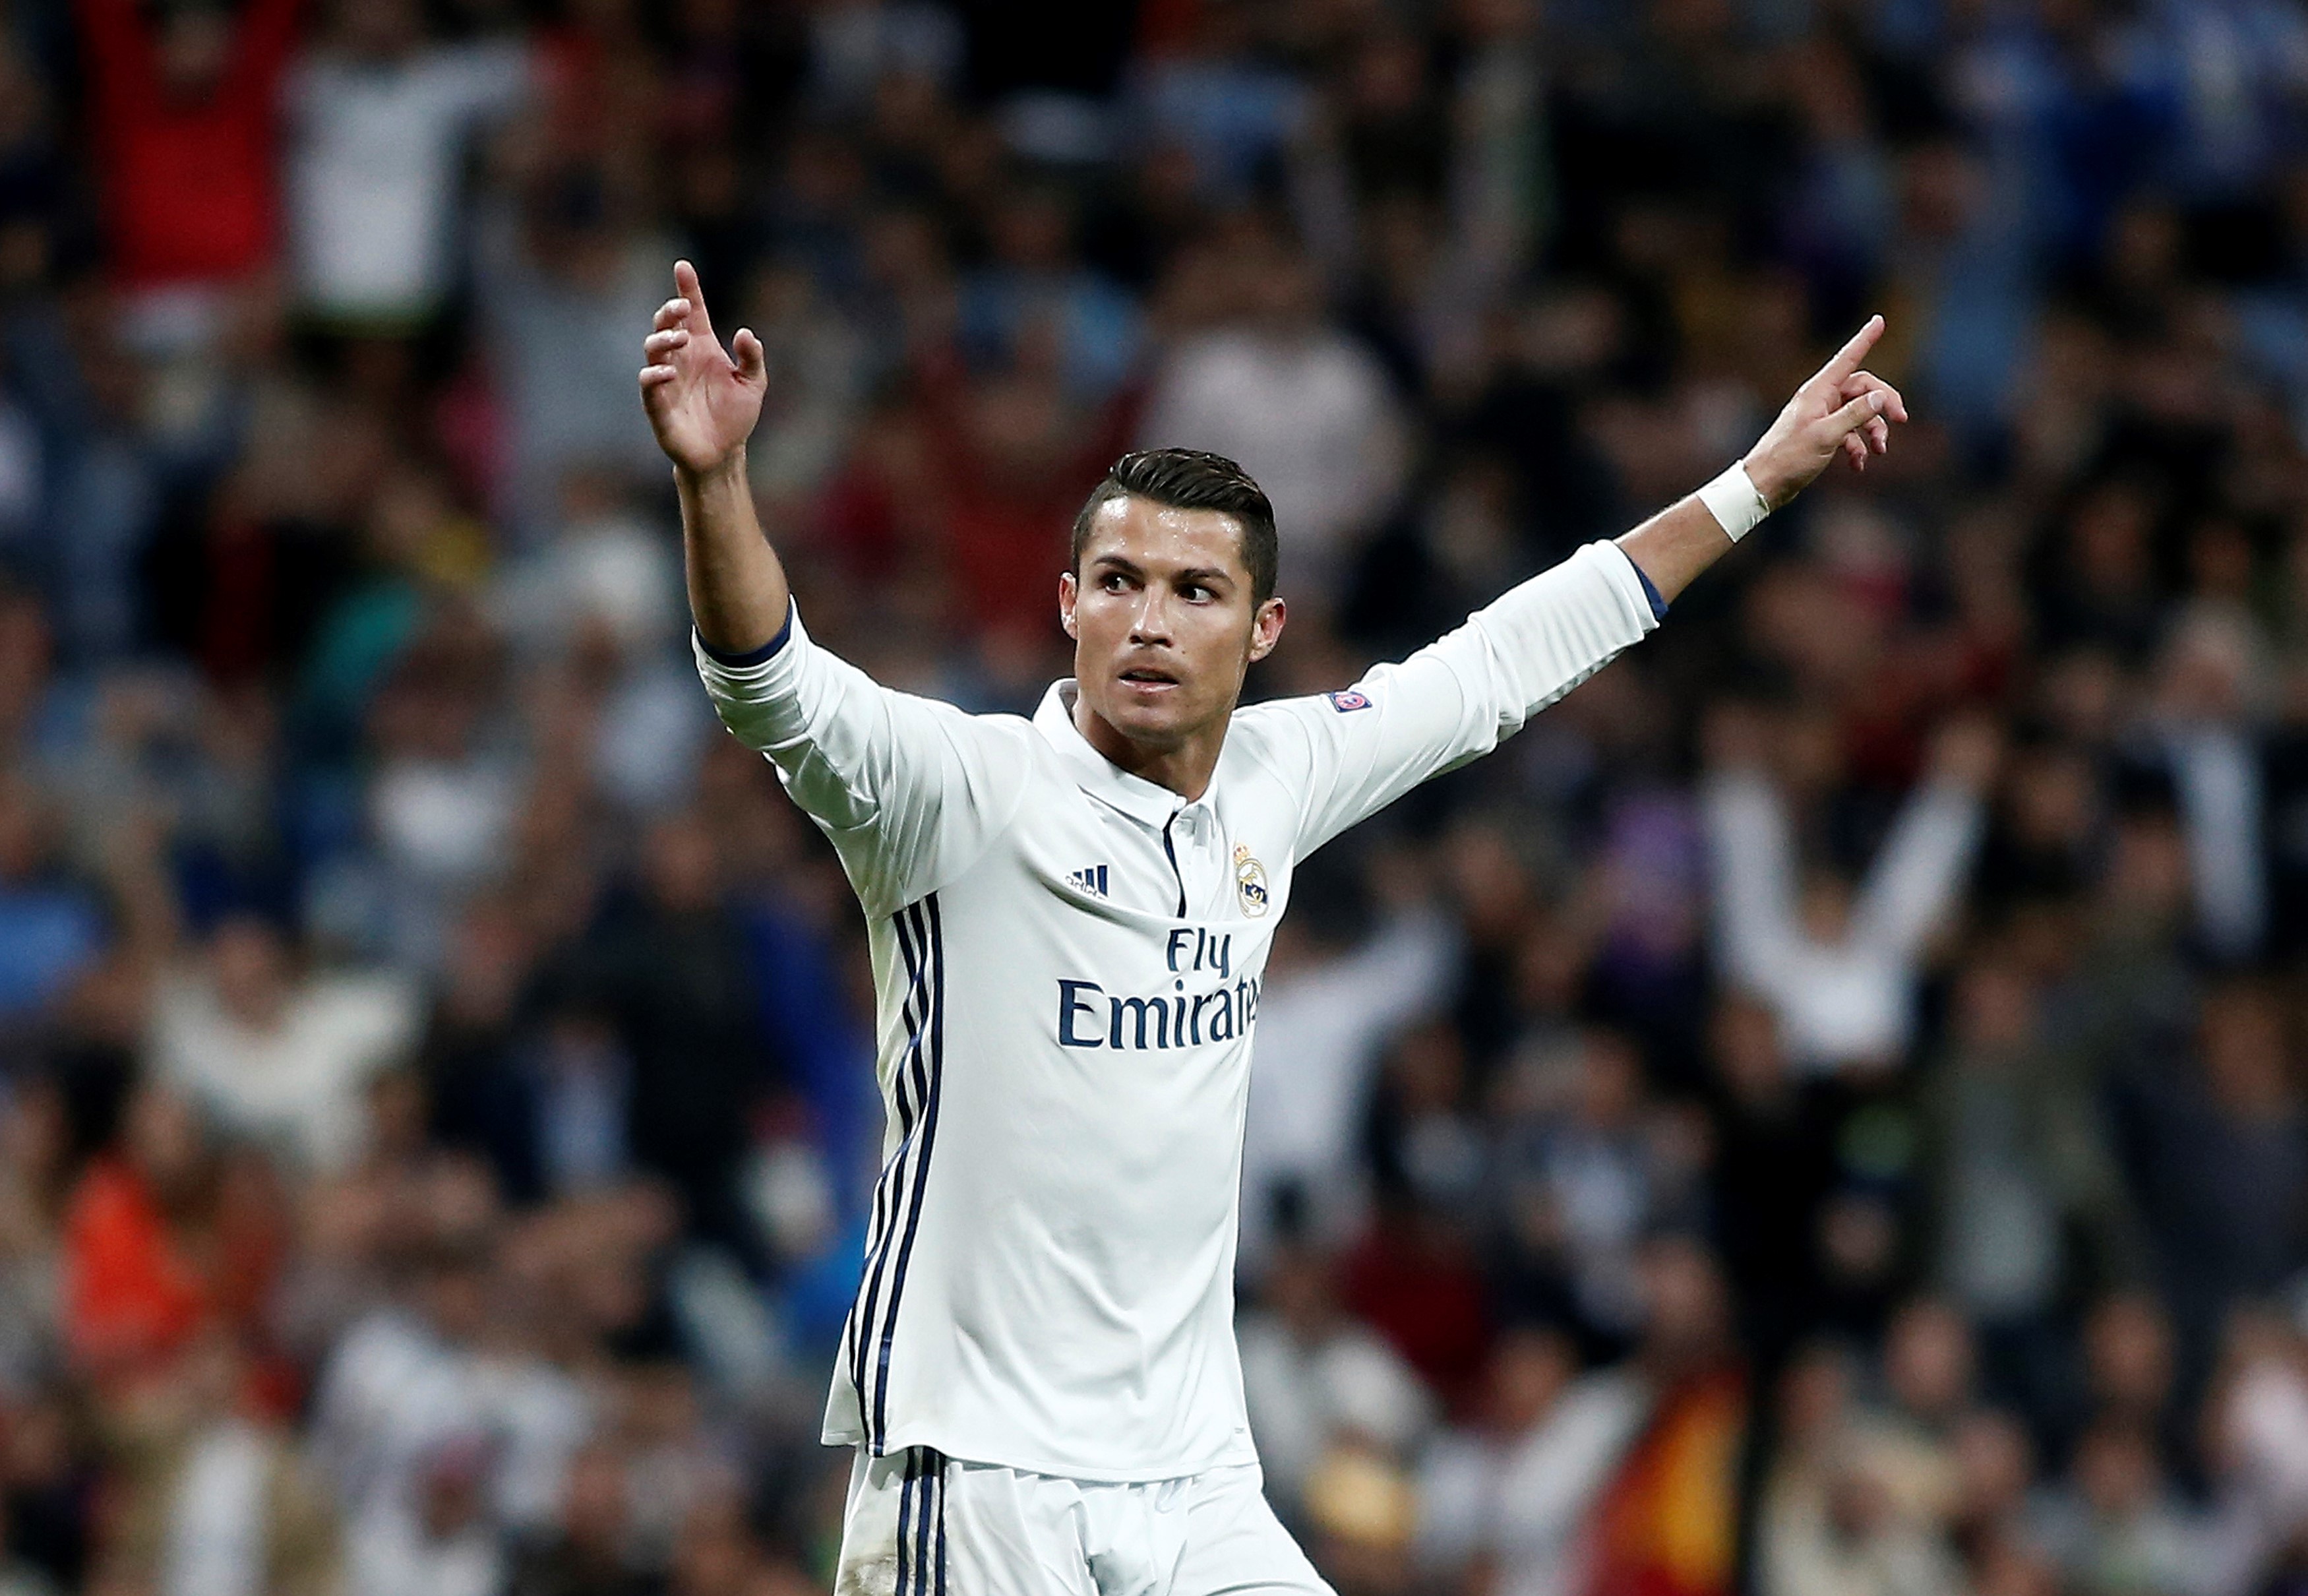 MADRID, SPAIN - SEPTEMBER 14 : Cristiano Ronaldo (7) of Real Madrid celebrates his score with his team mates during UEFA Champions League Group F match between Real Madrid and Sporting Lisbon at Santiago Bernabeu Stadium in Madrid, Spain on September 14, 2016. (Photo by Burak Akbulut/Anadolu Agency/Getty Images)